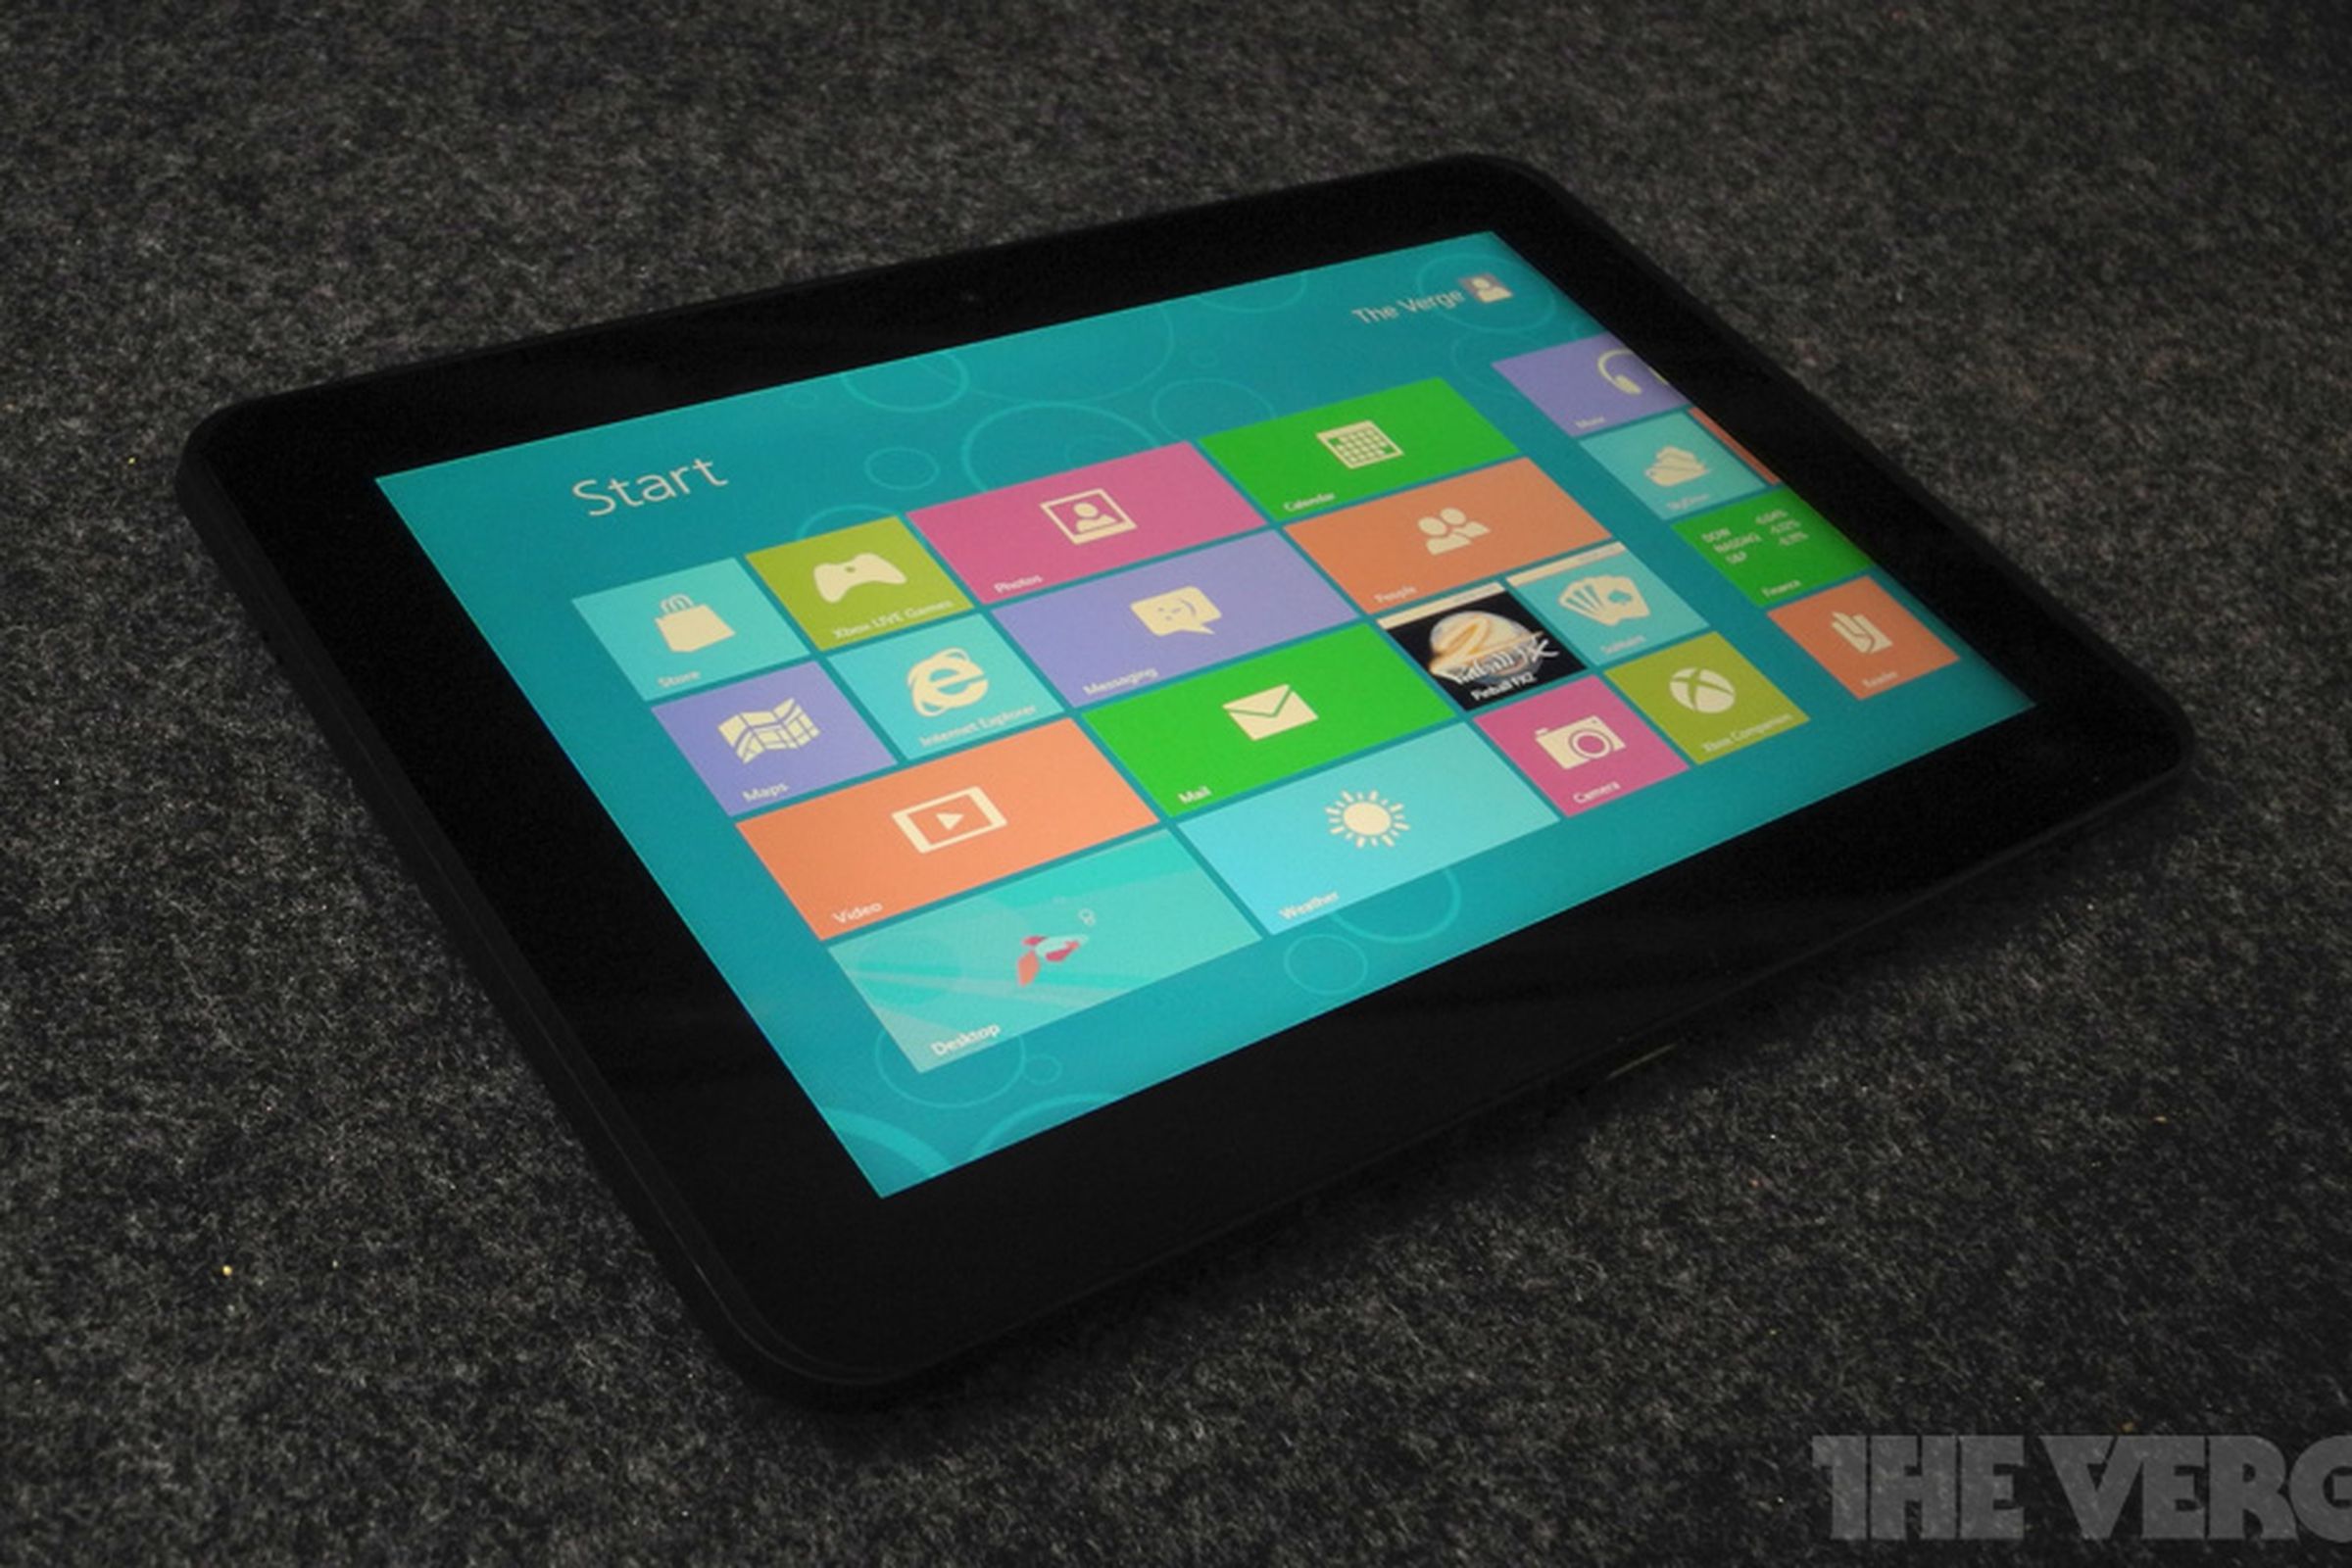 Windows 8 Consumer Preview on ViewSonic tablet